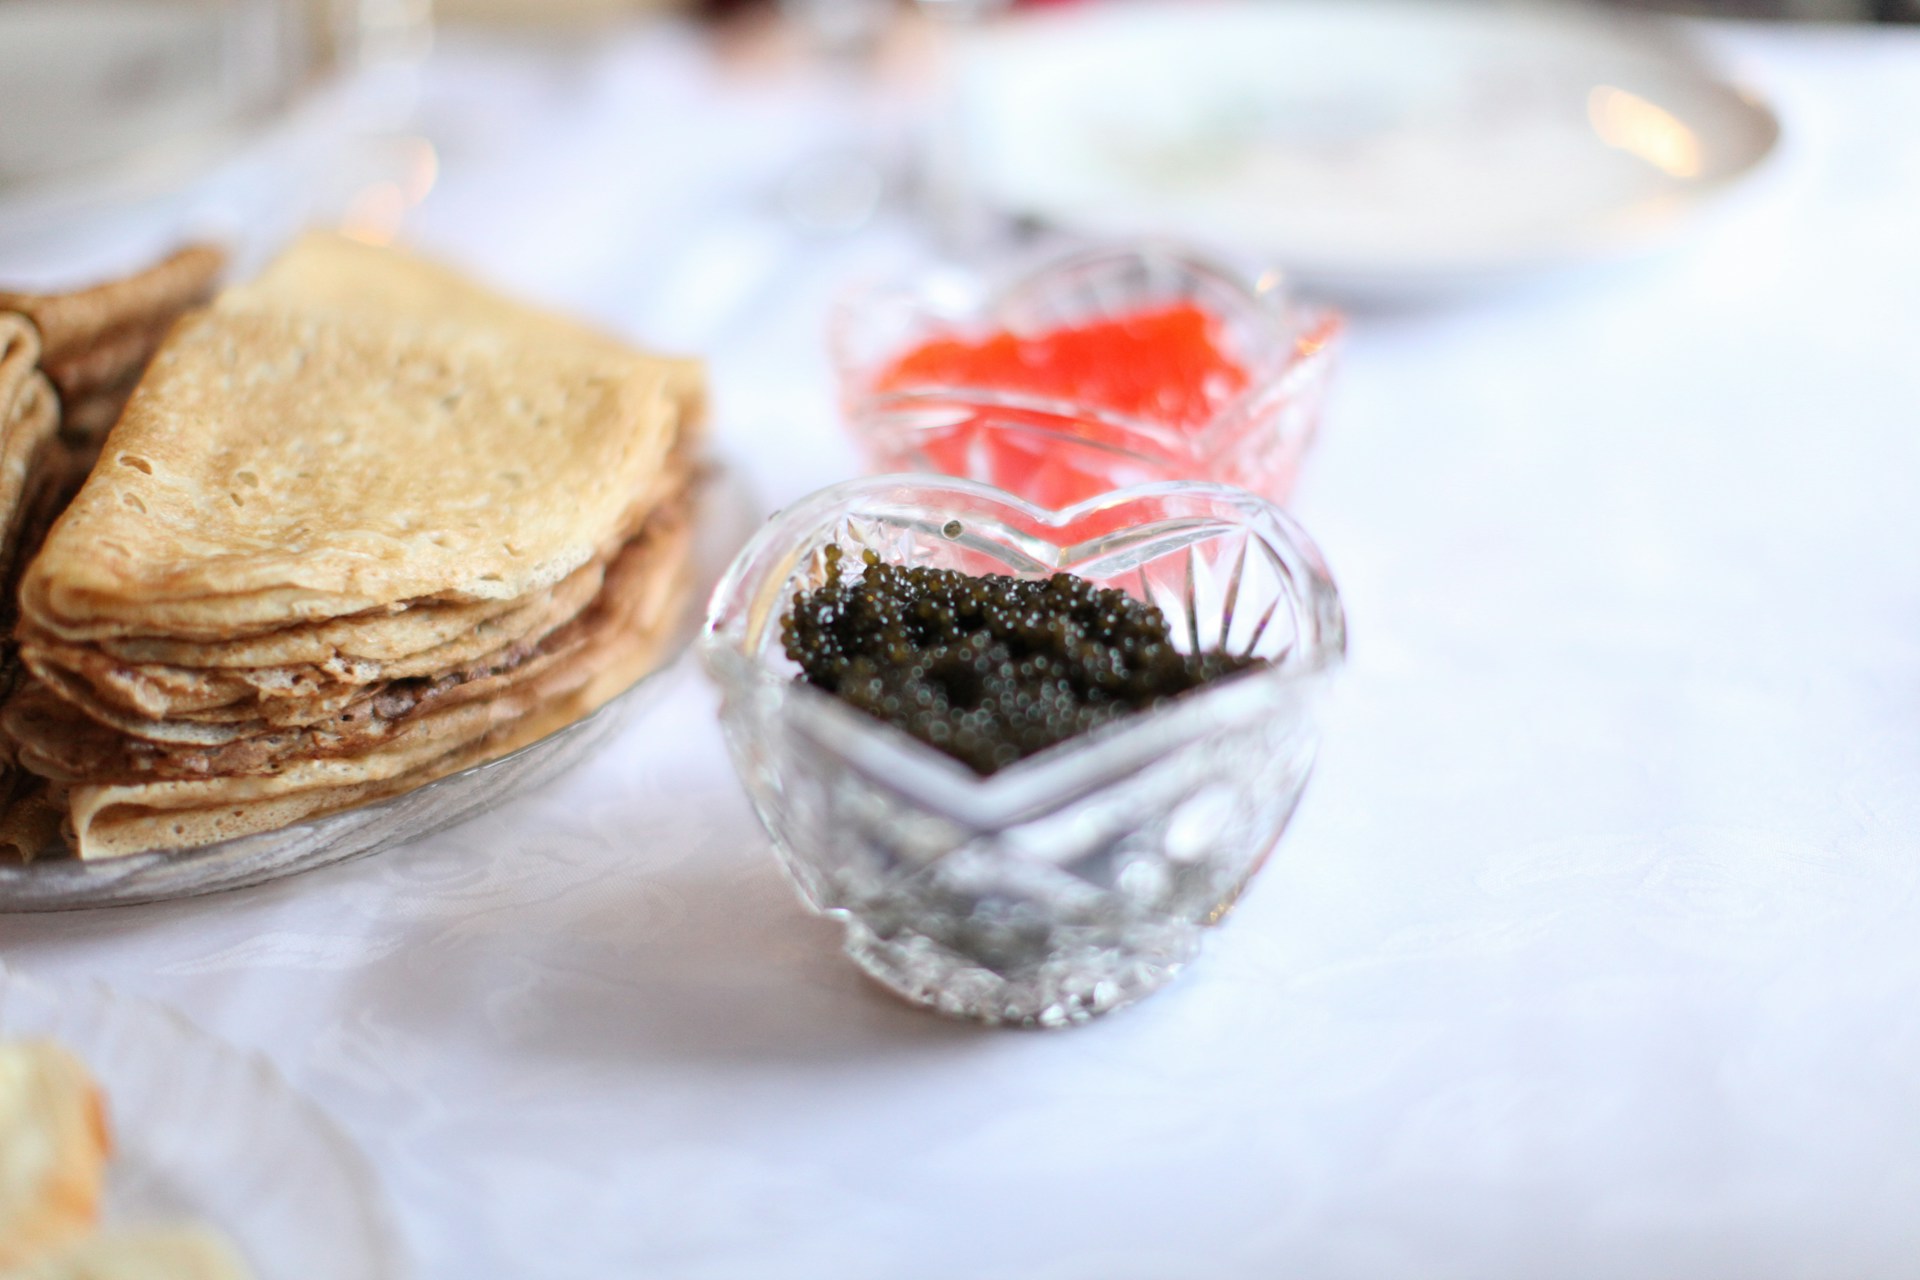 plate of pancakes and glass bowl of black caviar on table